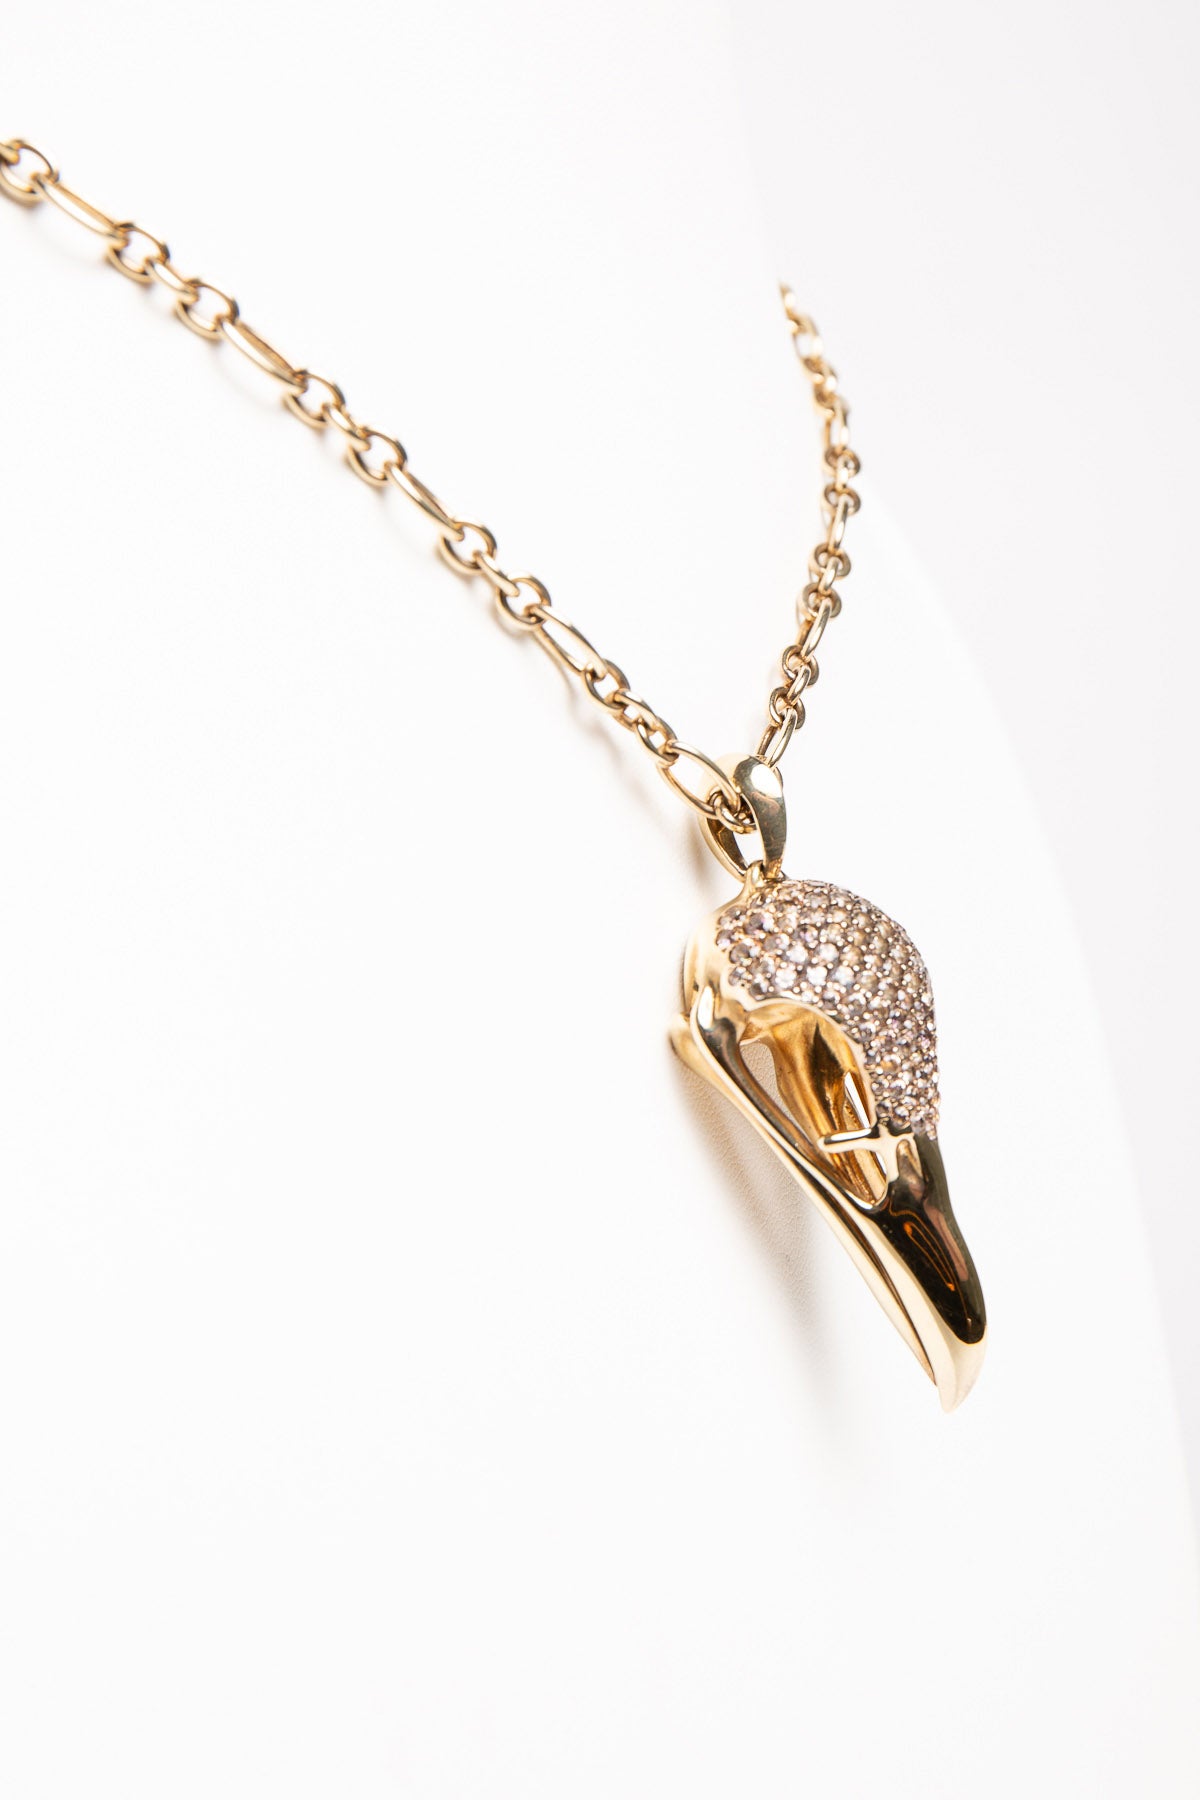 SHAUN LEANE | GOLD PLATED TOPAZ LARGE EAGLE NECKLACE